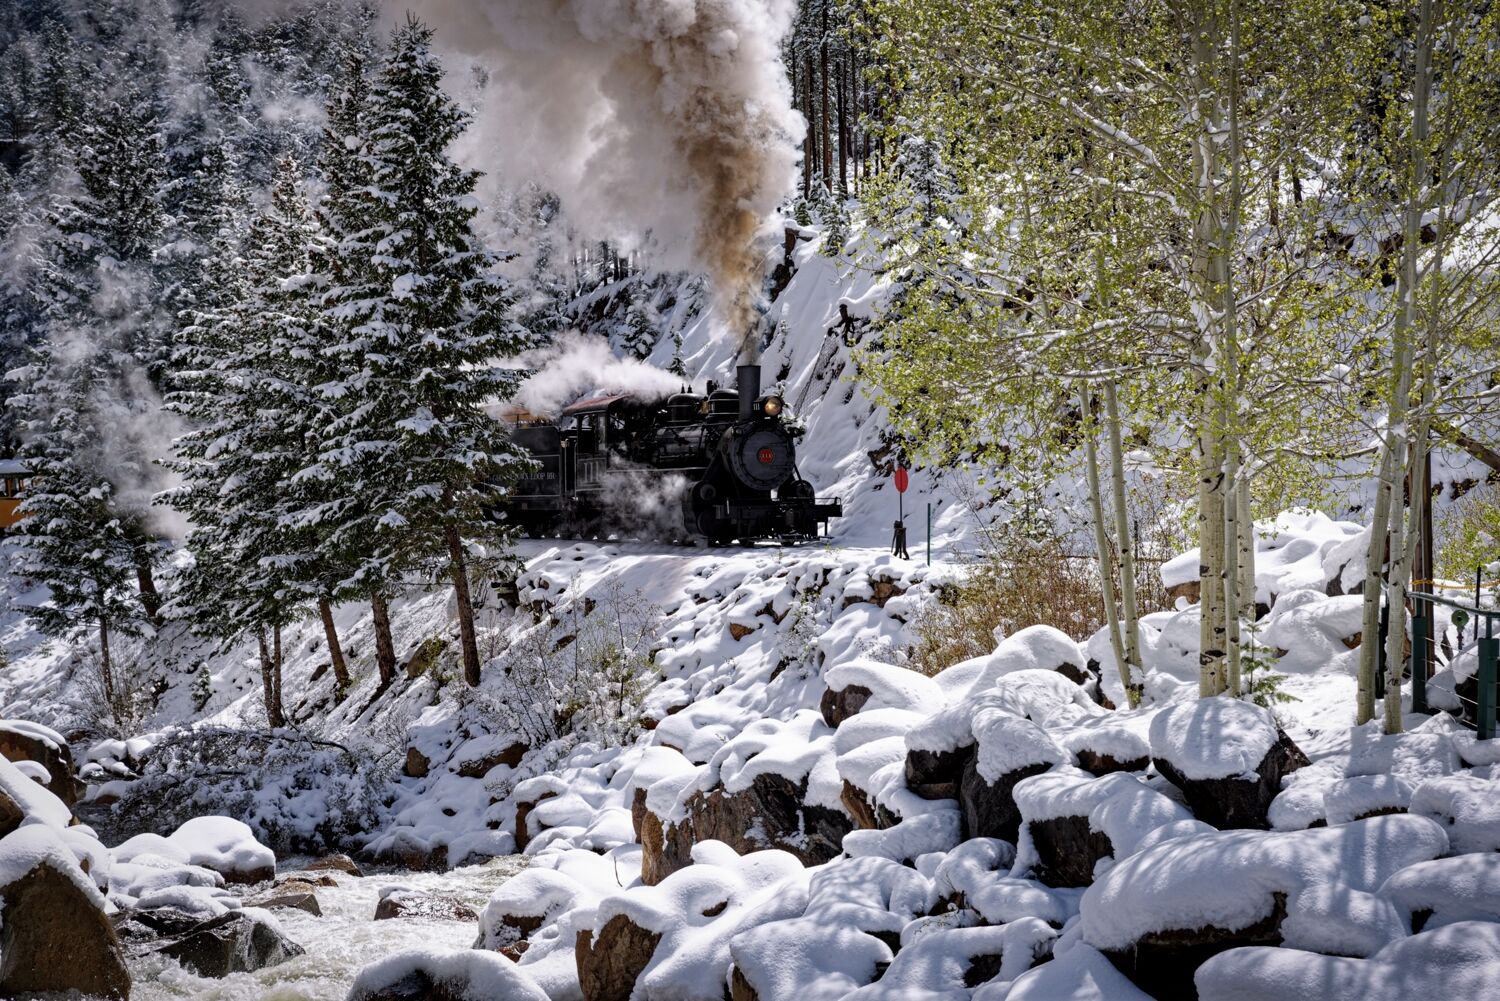 Running around the passenger train at the switch at Devils Gate station in Georgetown Colorado. Fresh snow blankets the ground...